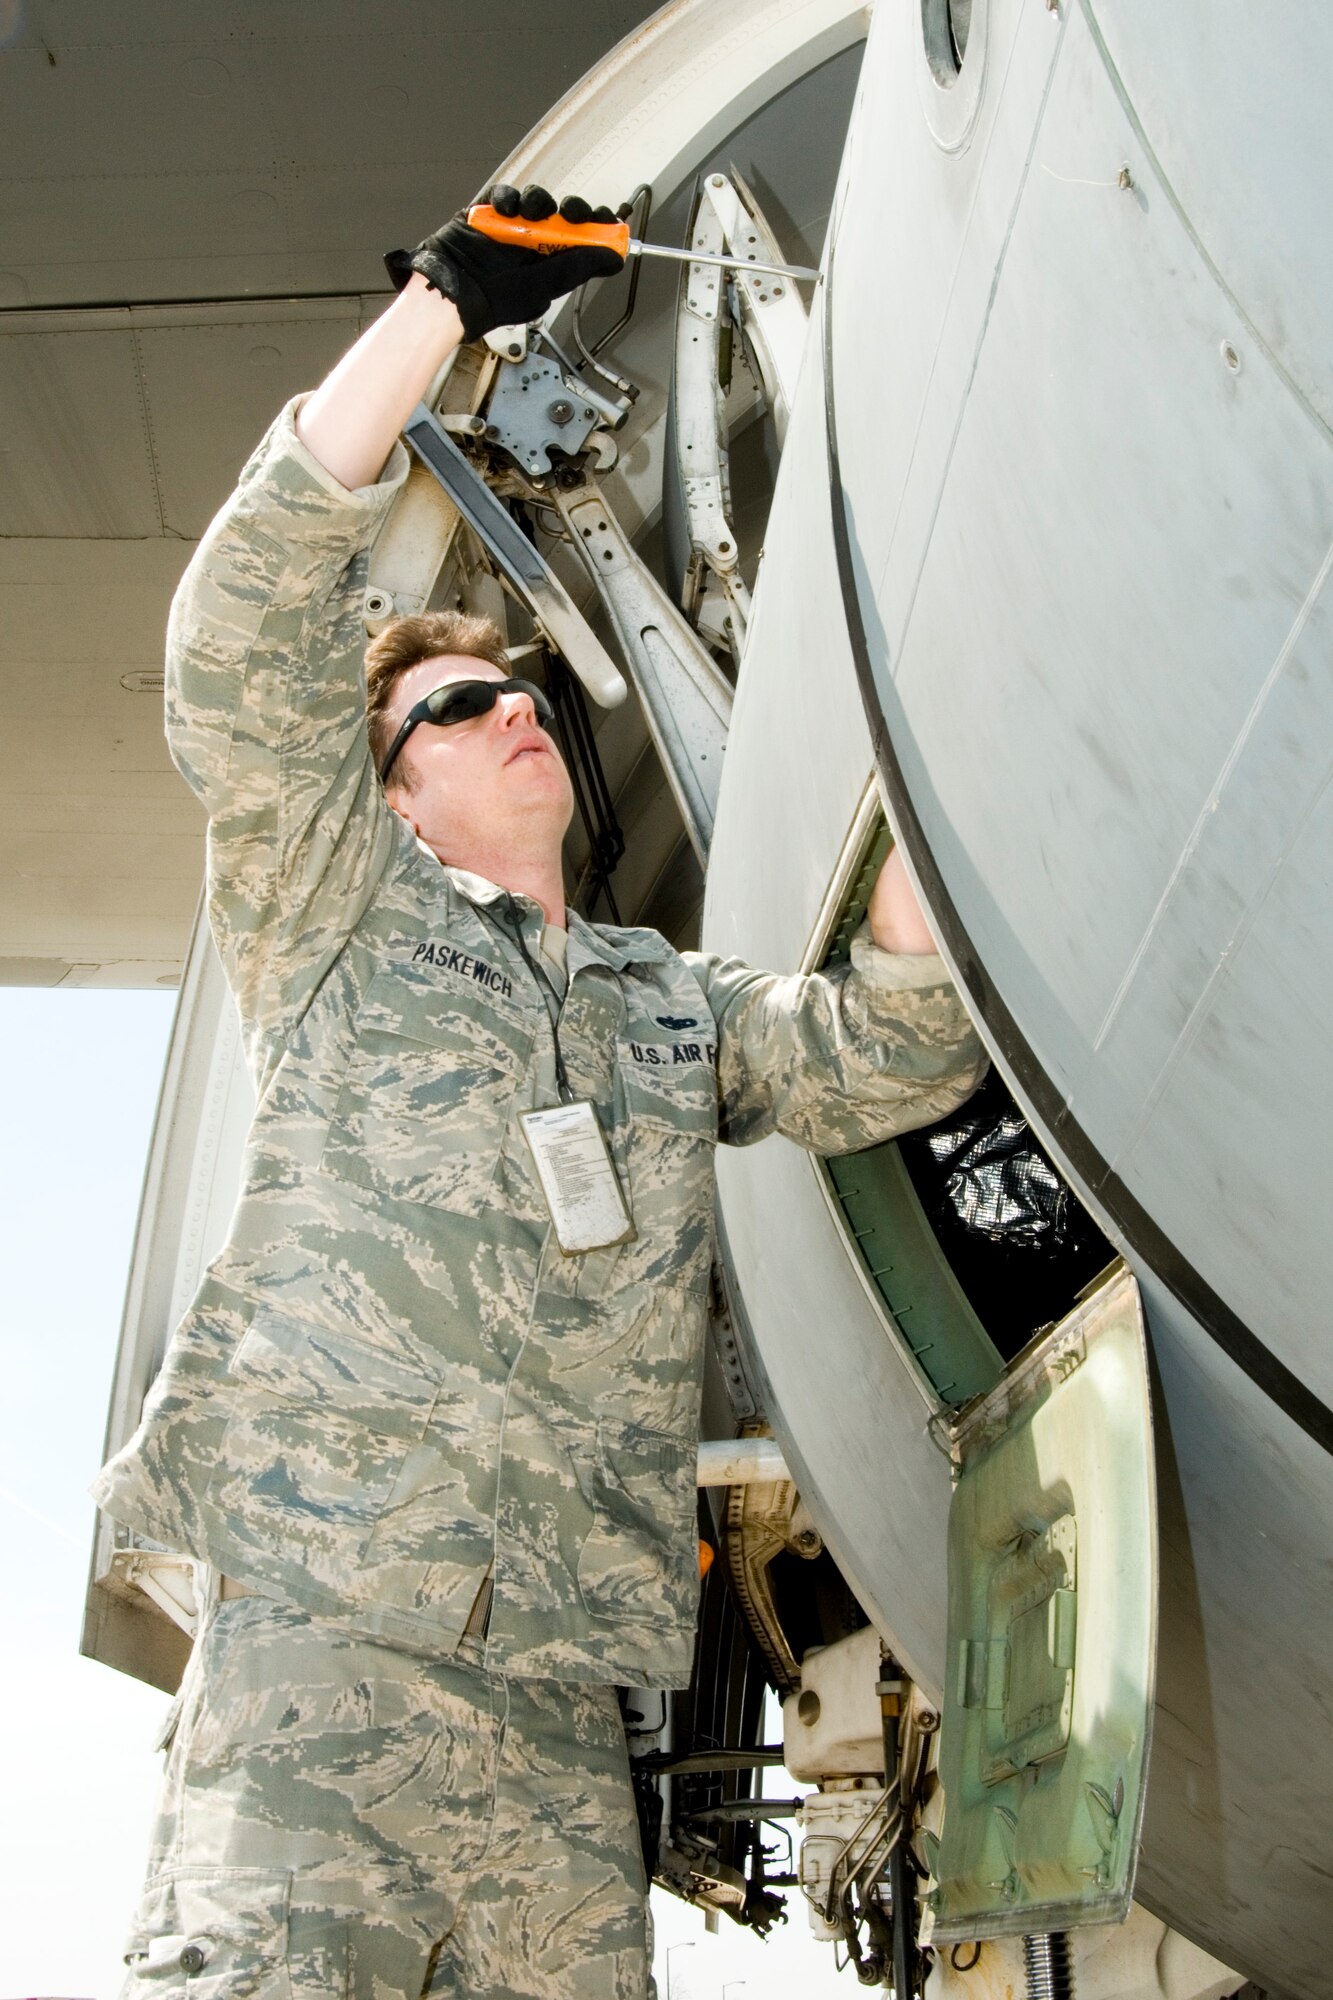 Tech. Sgt. Devon Paskewich, a crew chief at the 167th Airlift Wing, seals a panel on the side of a C-5 aircraft, at the Martinsburg, W.Va. unit on April 7, 2011. The unit's C-5 aircraft have recently supported missions in Libya, Japan, Afghanistan, and Iraq, keeping both operations and maintenance personnel busy. (U.S. Air Force photo by MSgt Emily Beightol-Deyerle)